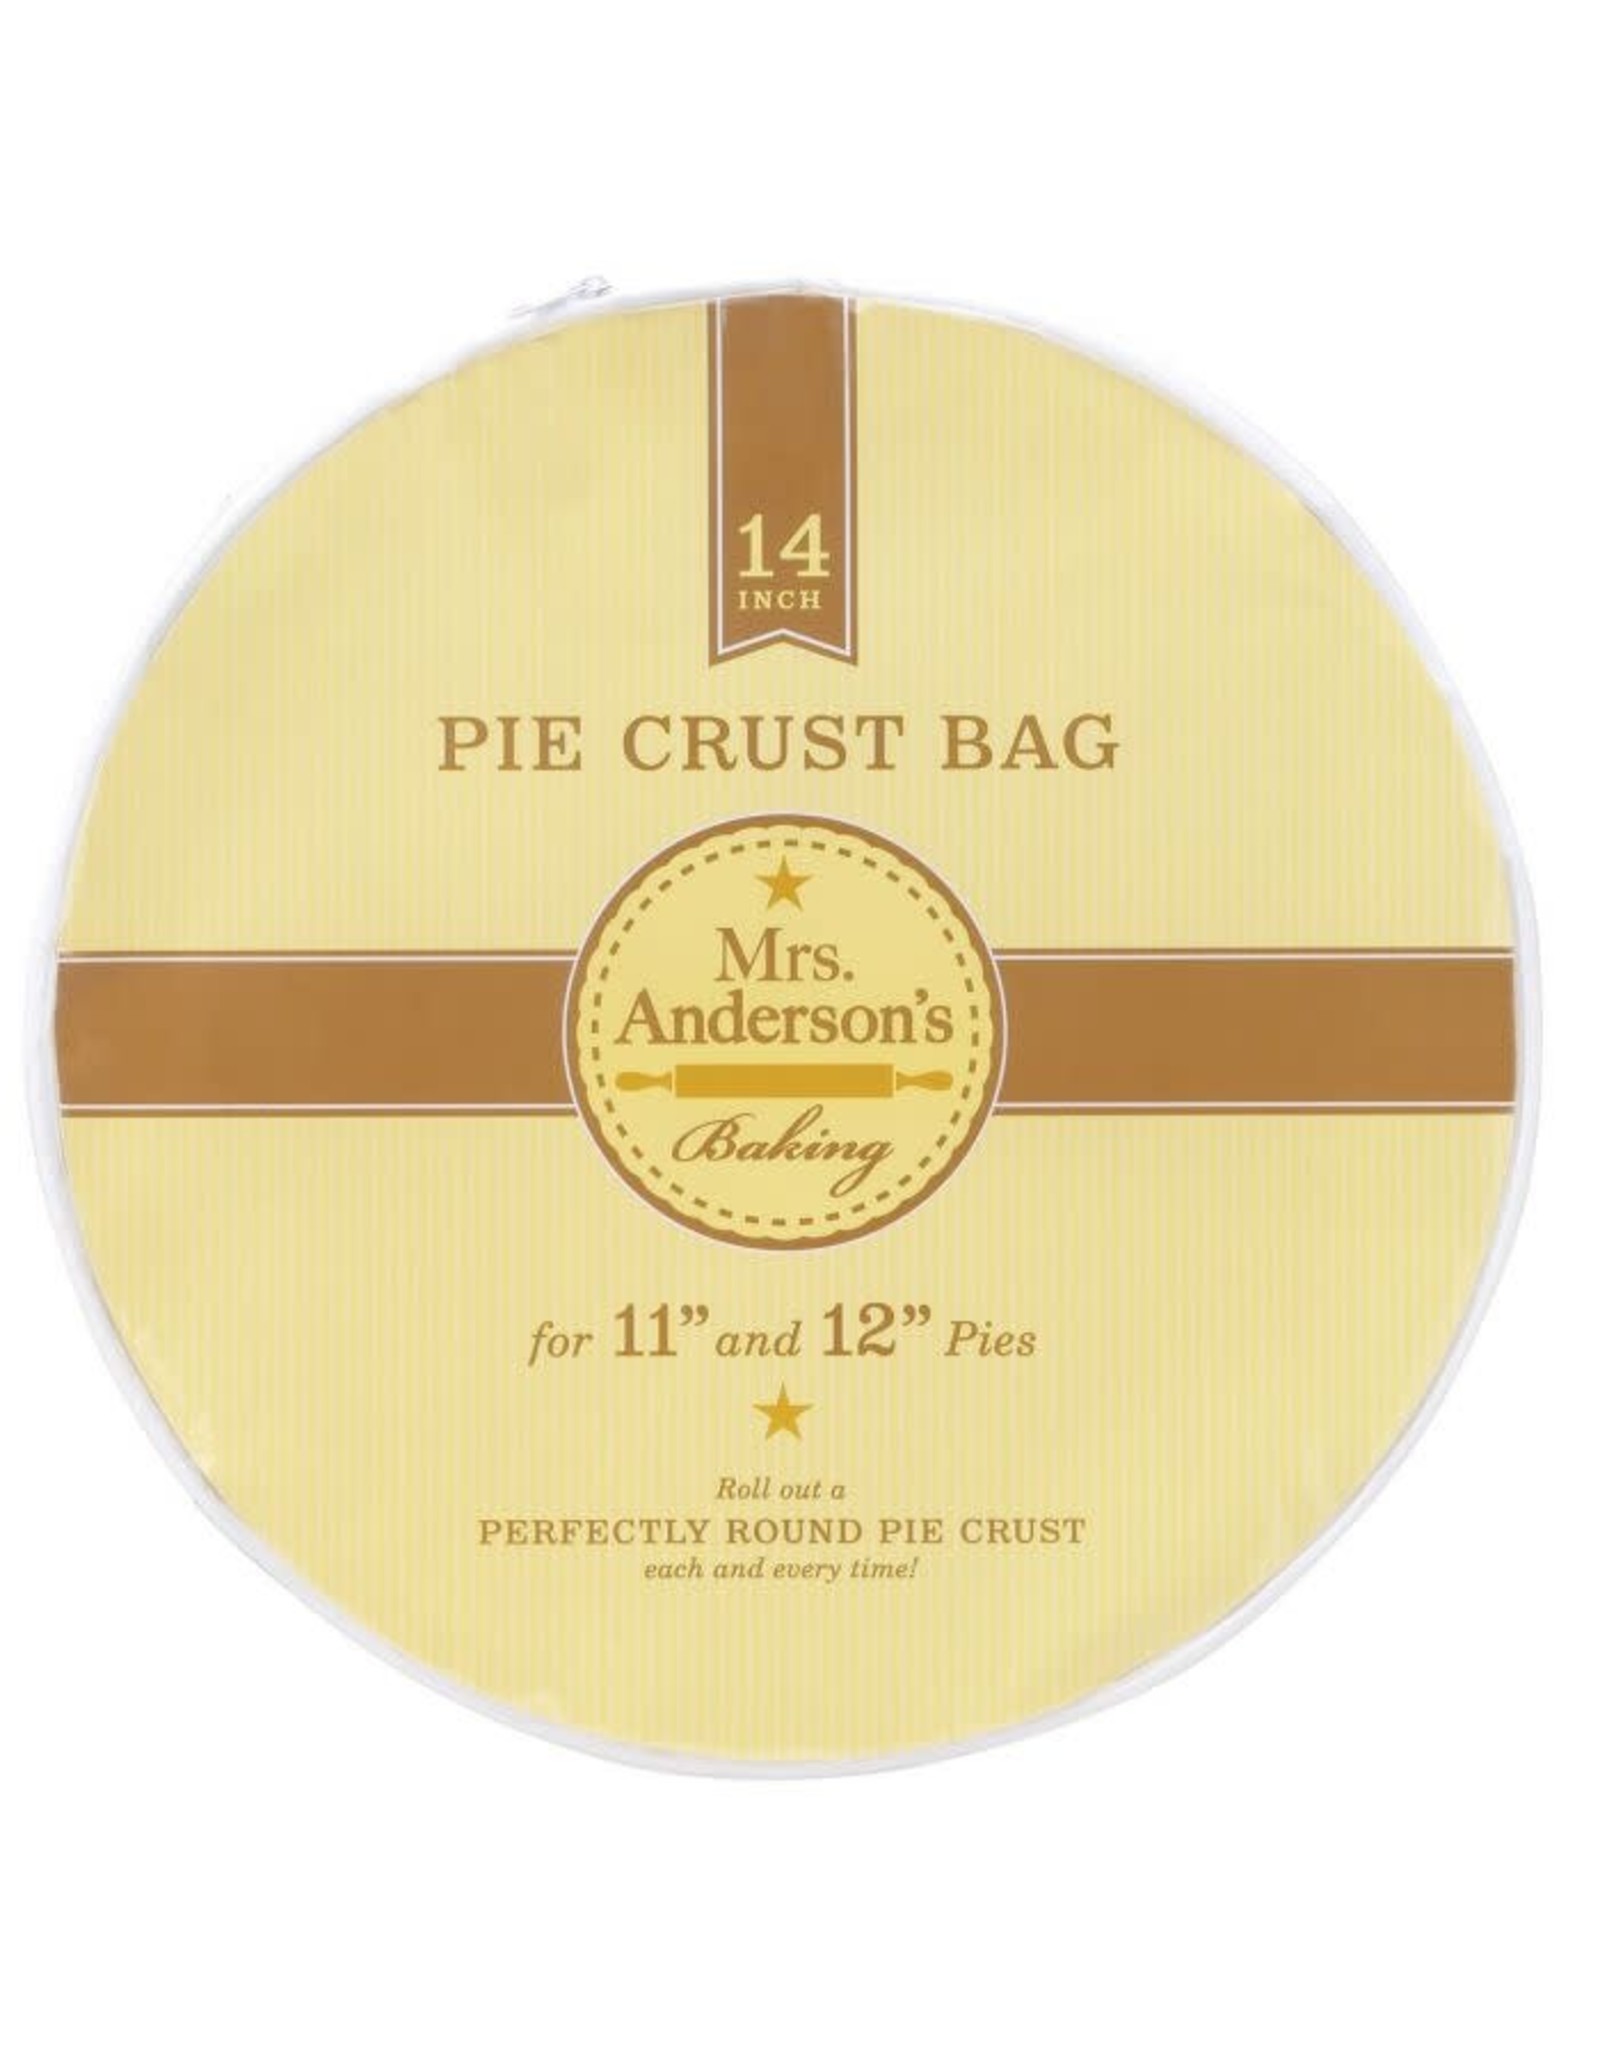 Pie Crust Bag-11” and 12” Pies